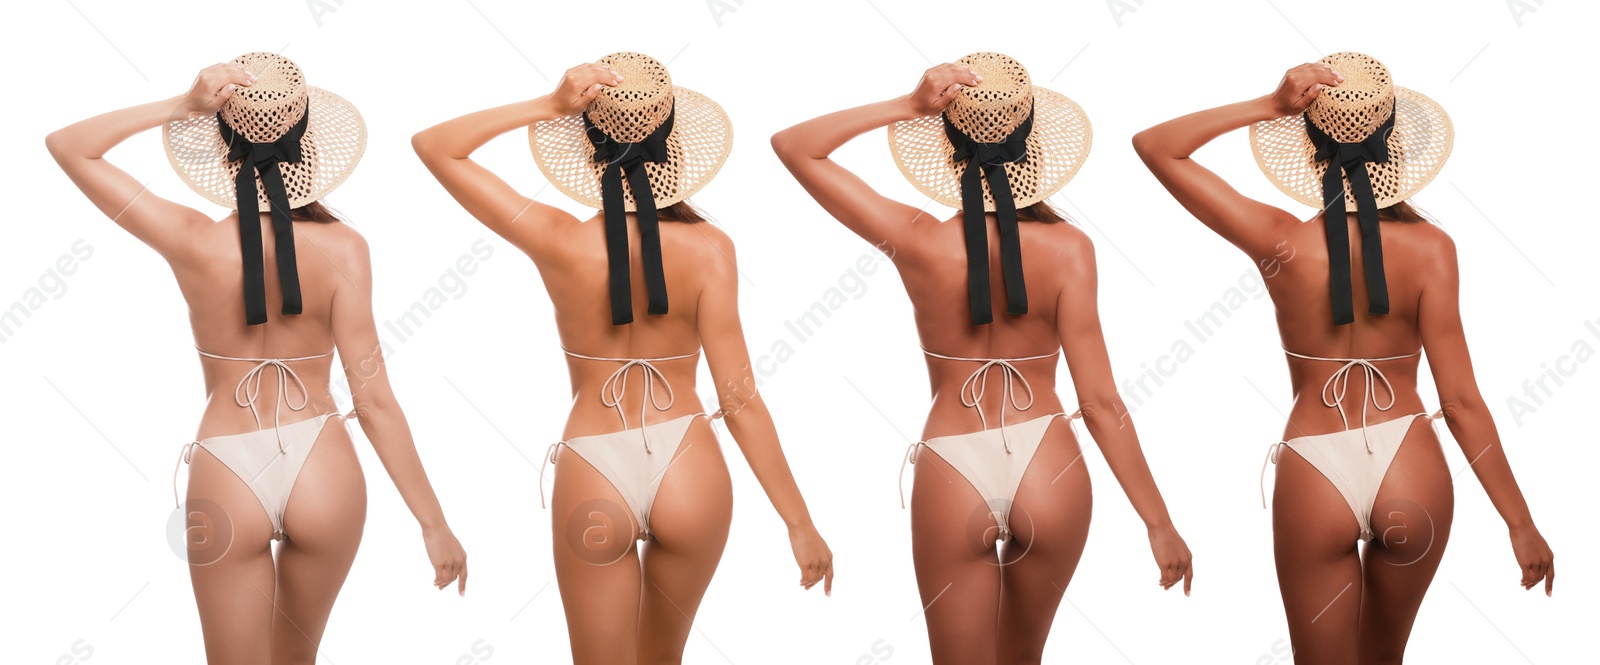 Image of Young woman with beautiful body on white background, back view. Banner collage showing stages of suntanning